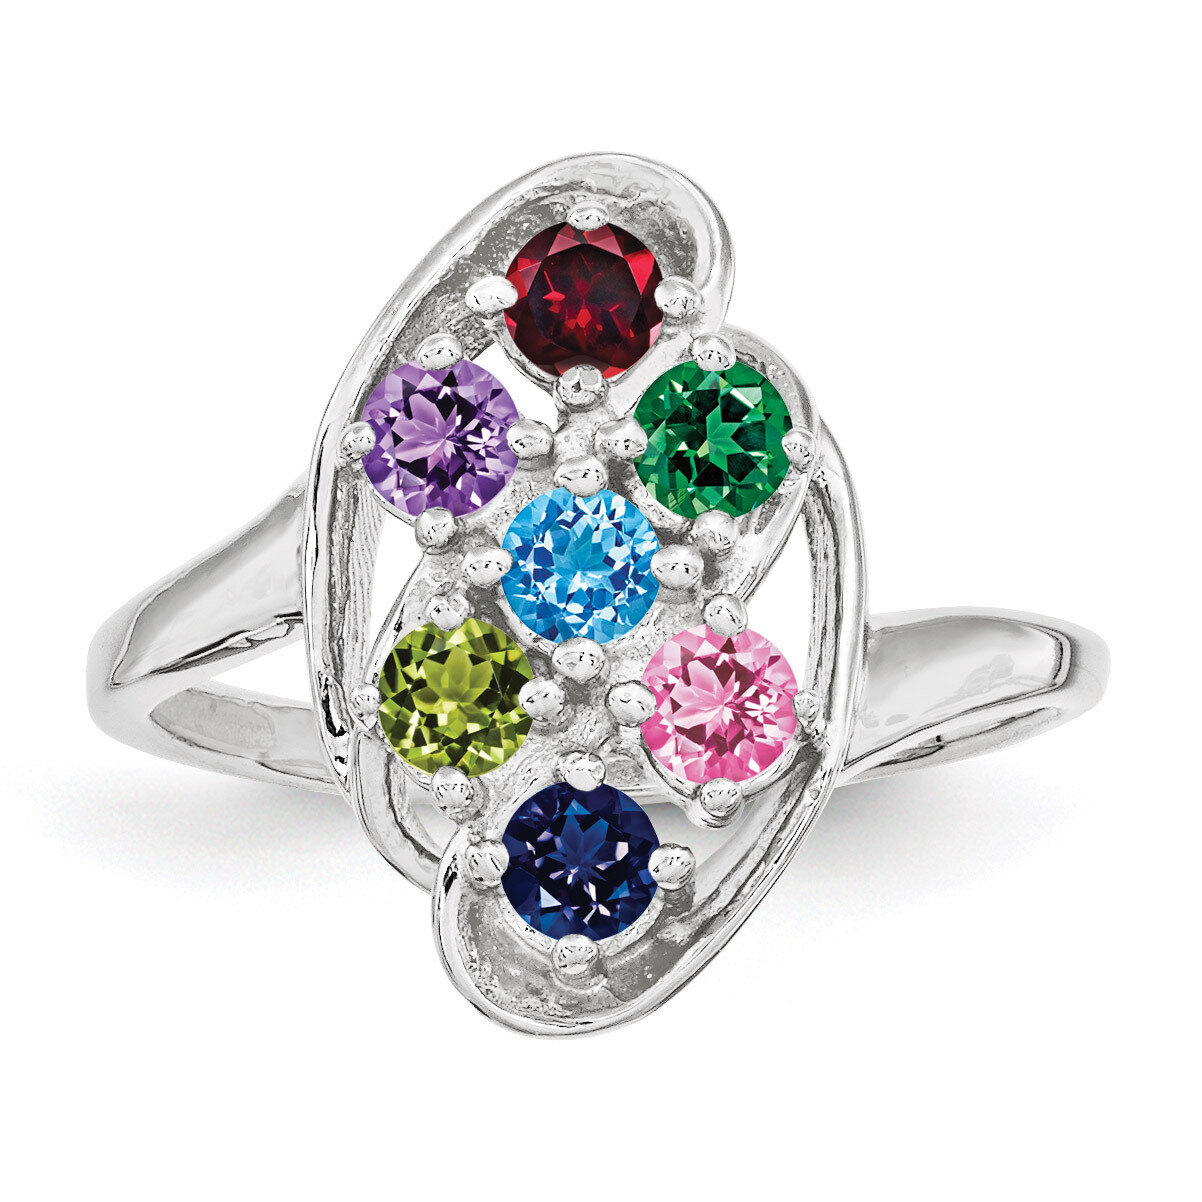 7 Birthstones family jewelry ring Sterling Silver XMR3/7SS